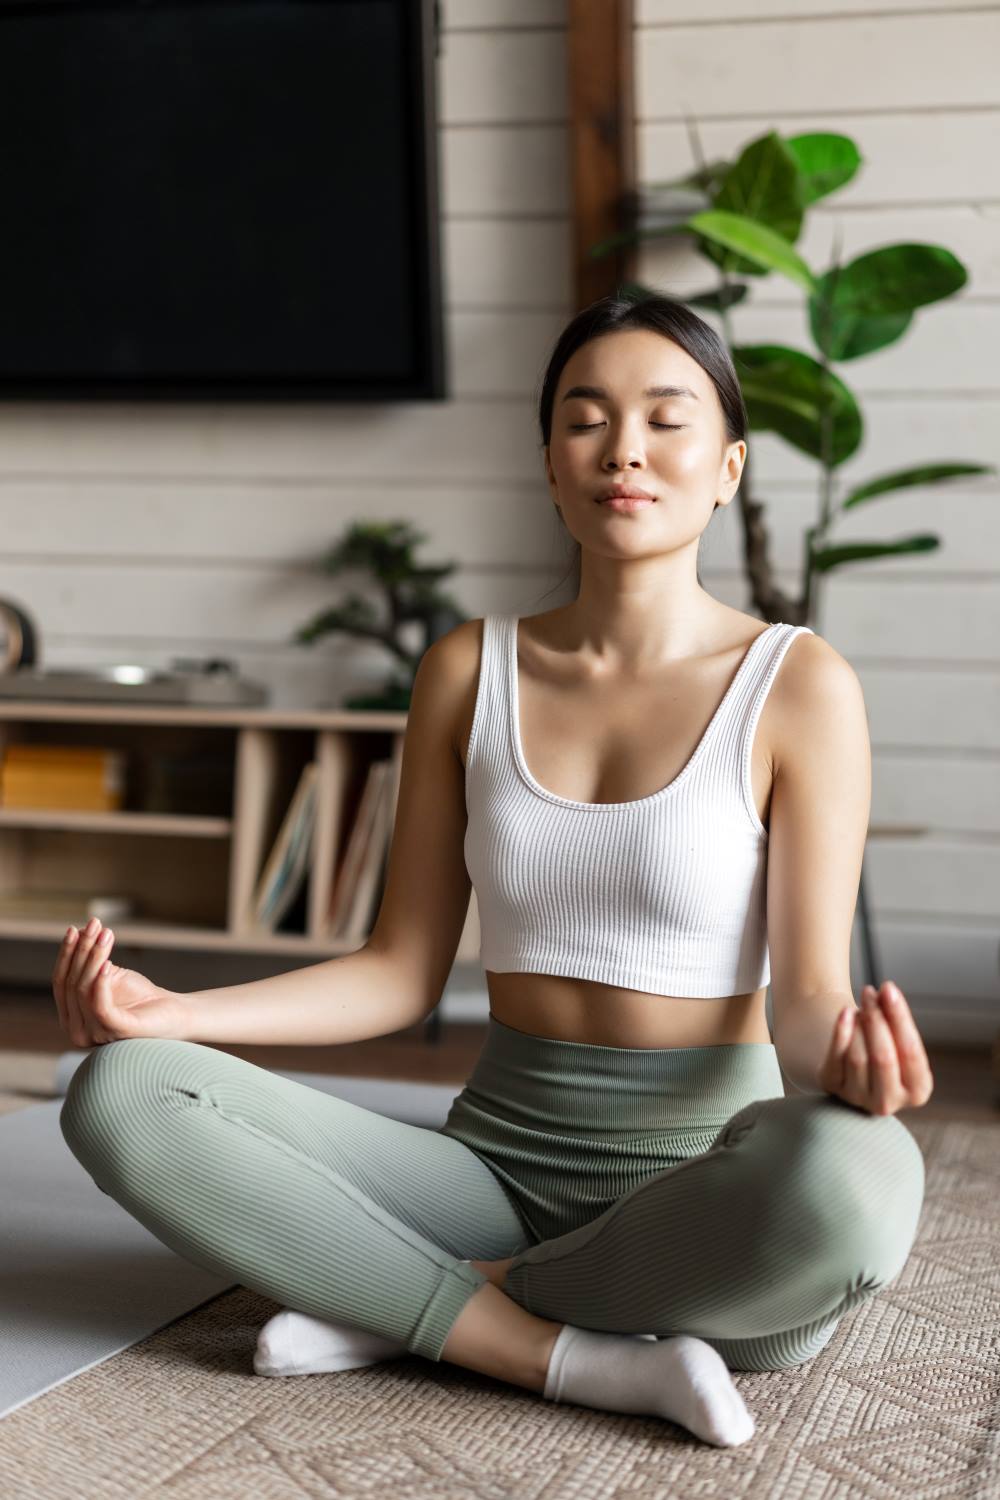 a women is meditating in front of a TV